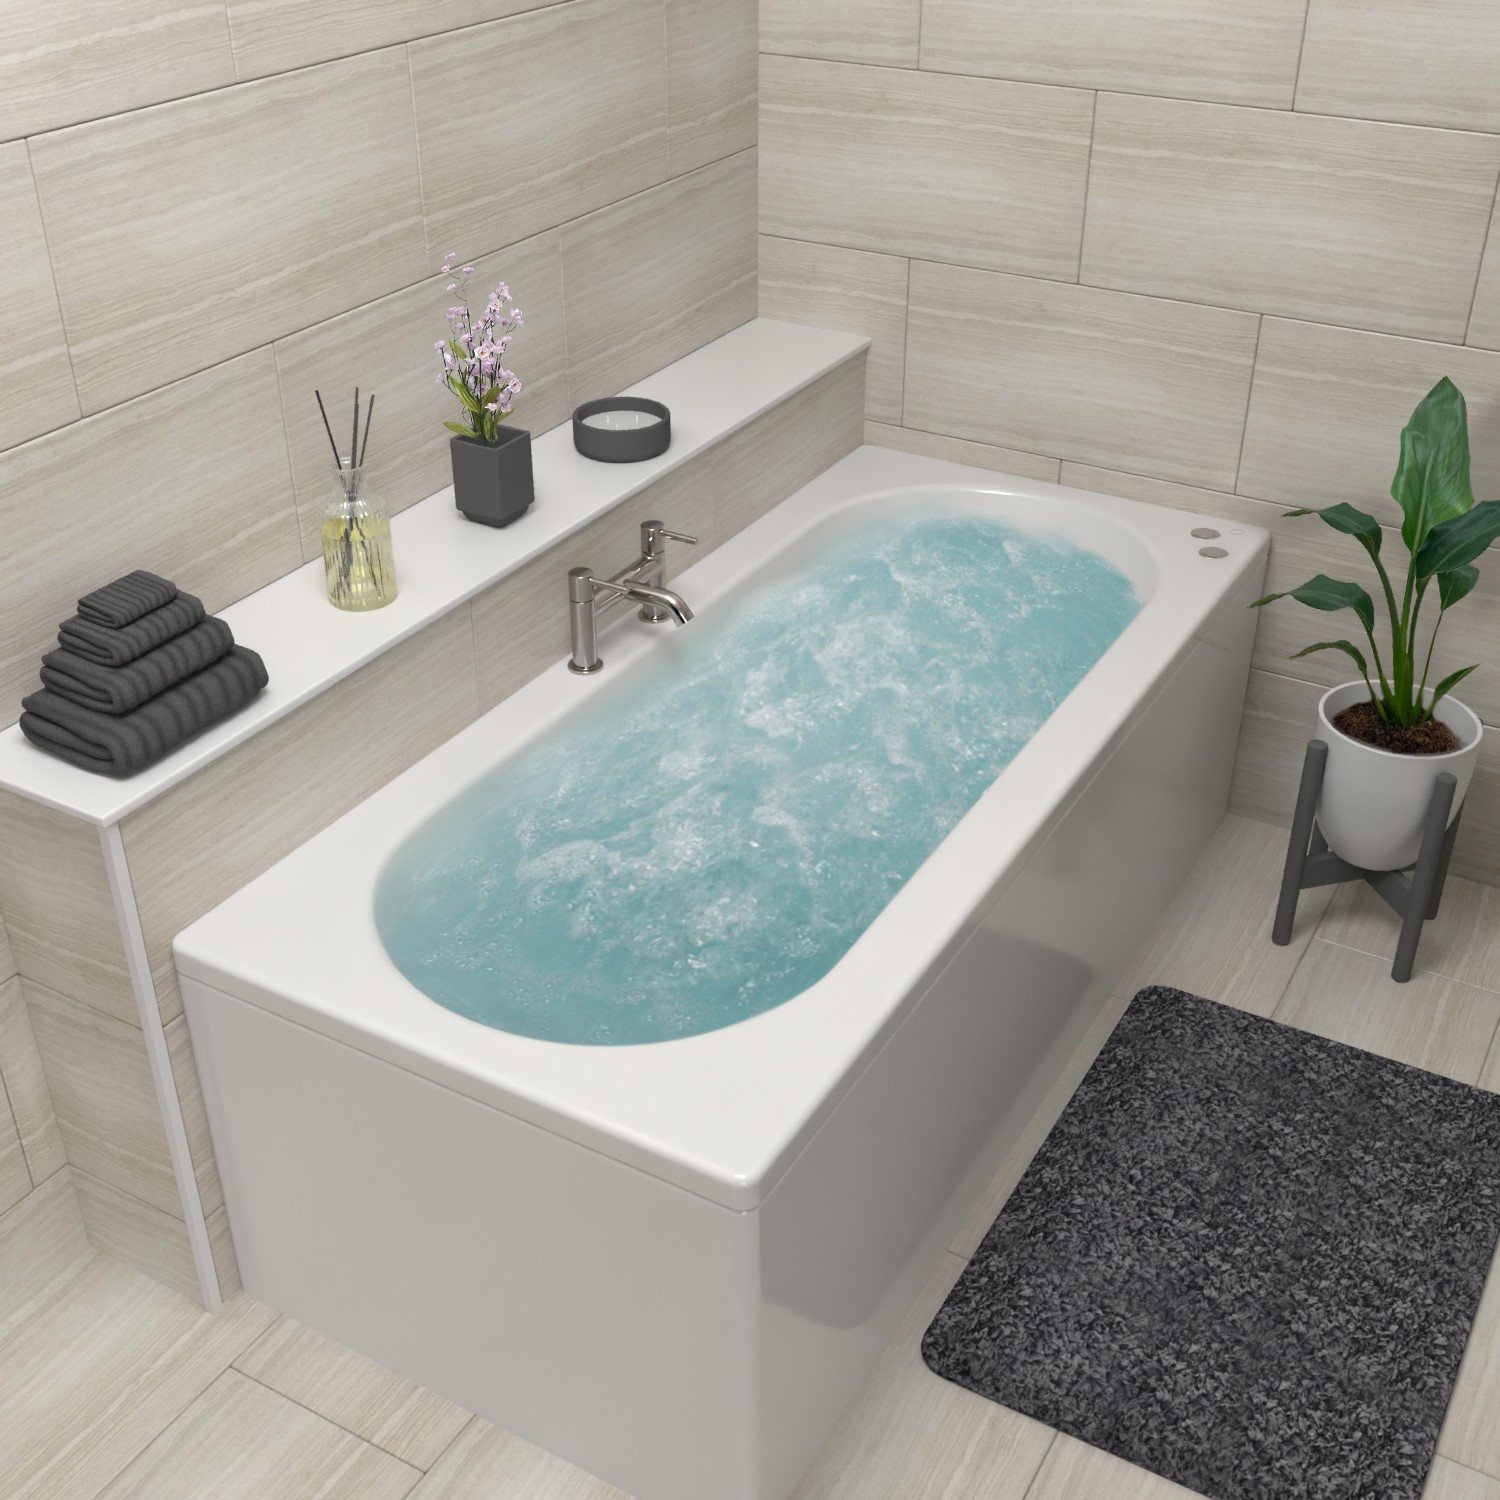 Burford Double Ended Bath with 14 Jet Whirlpool System and 12 Jet Airspa System - 1800 x 800mm